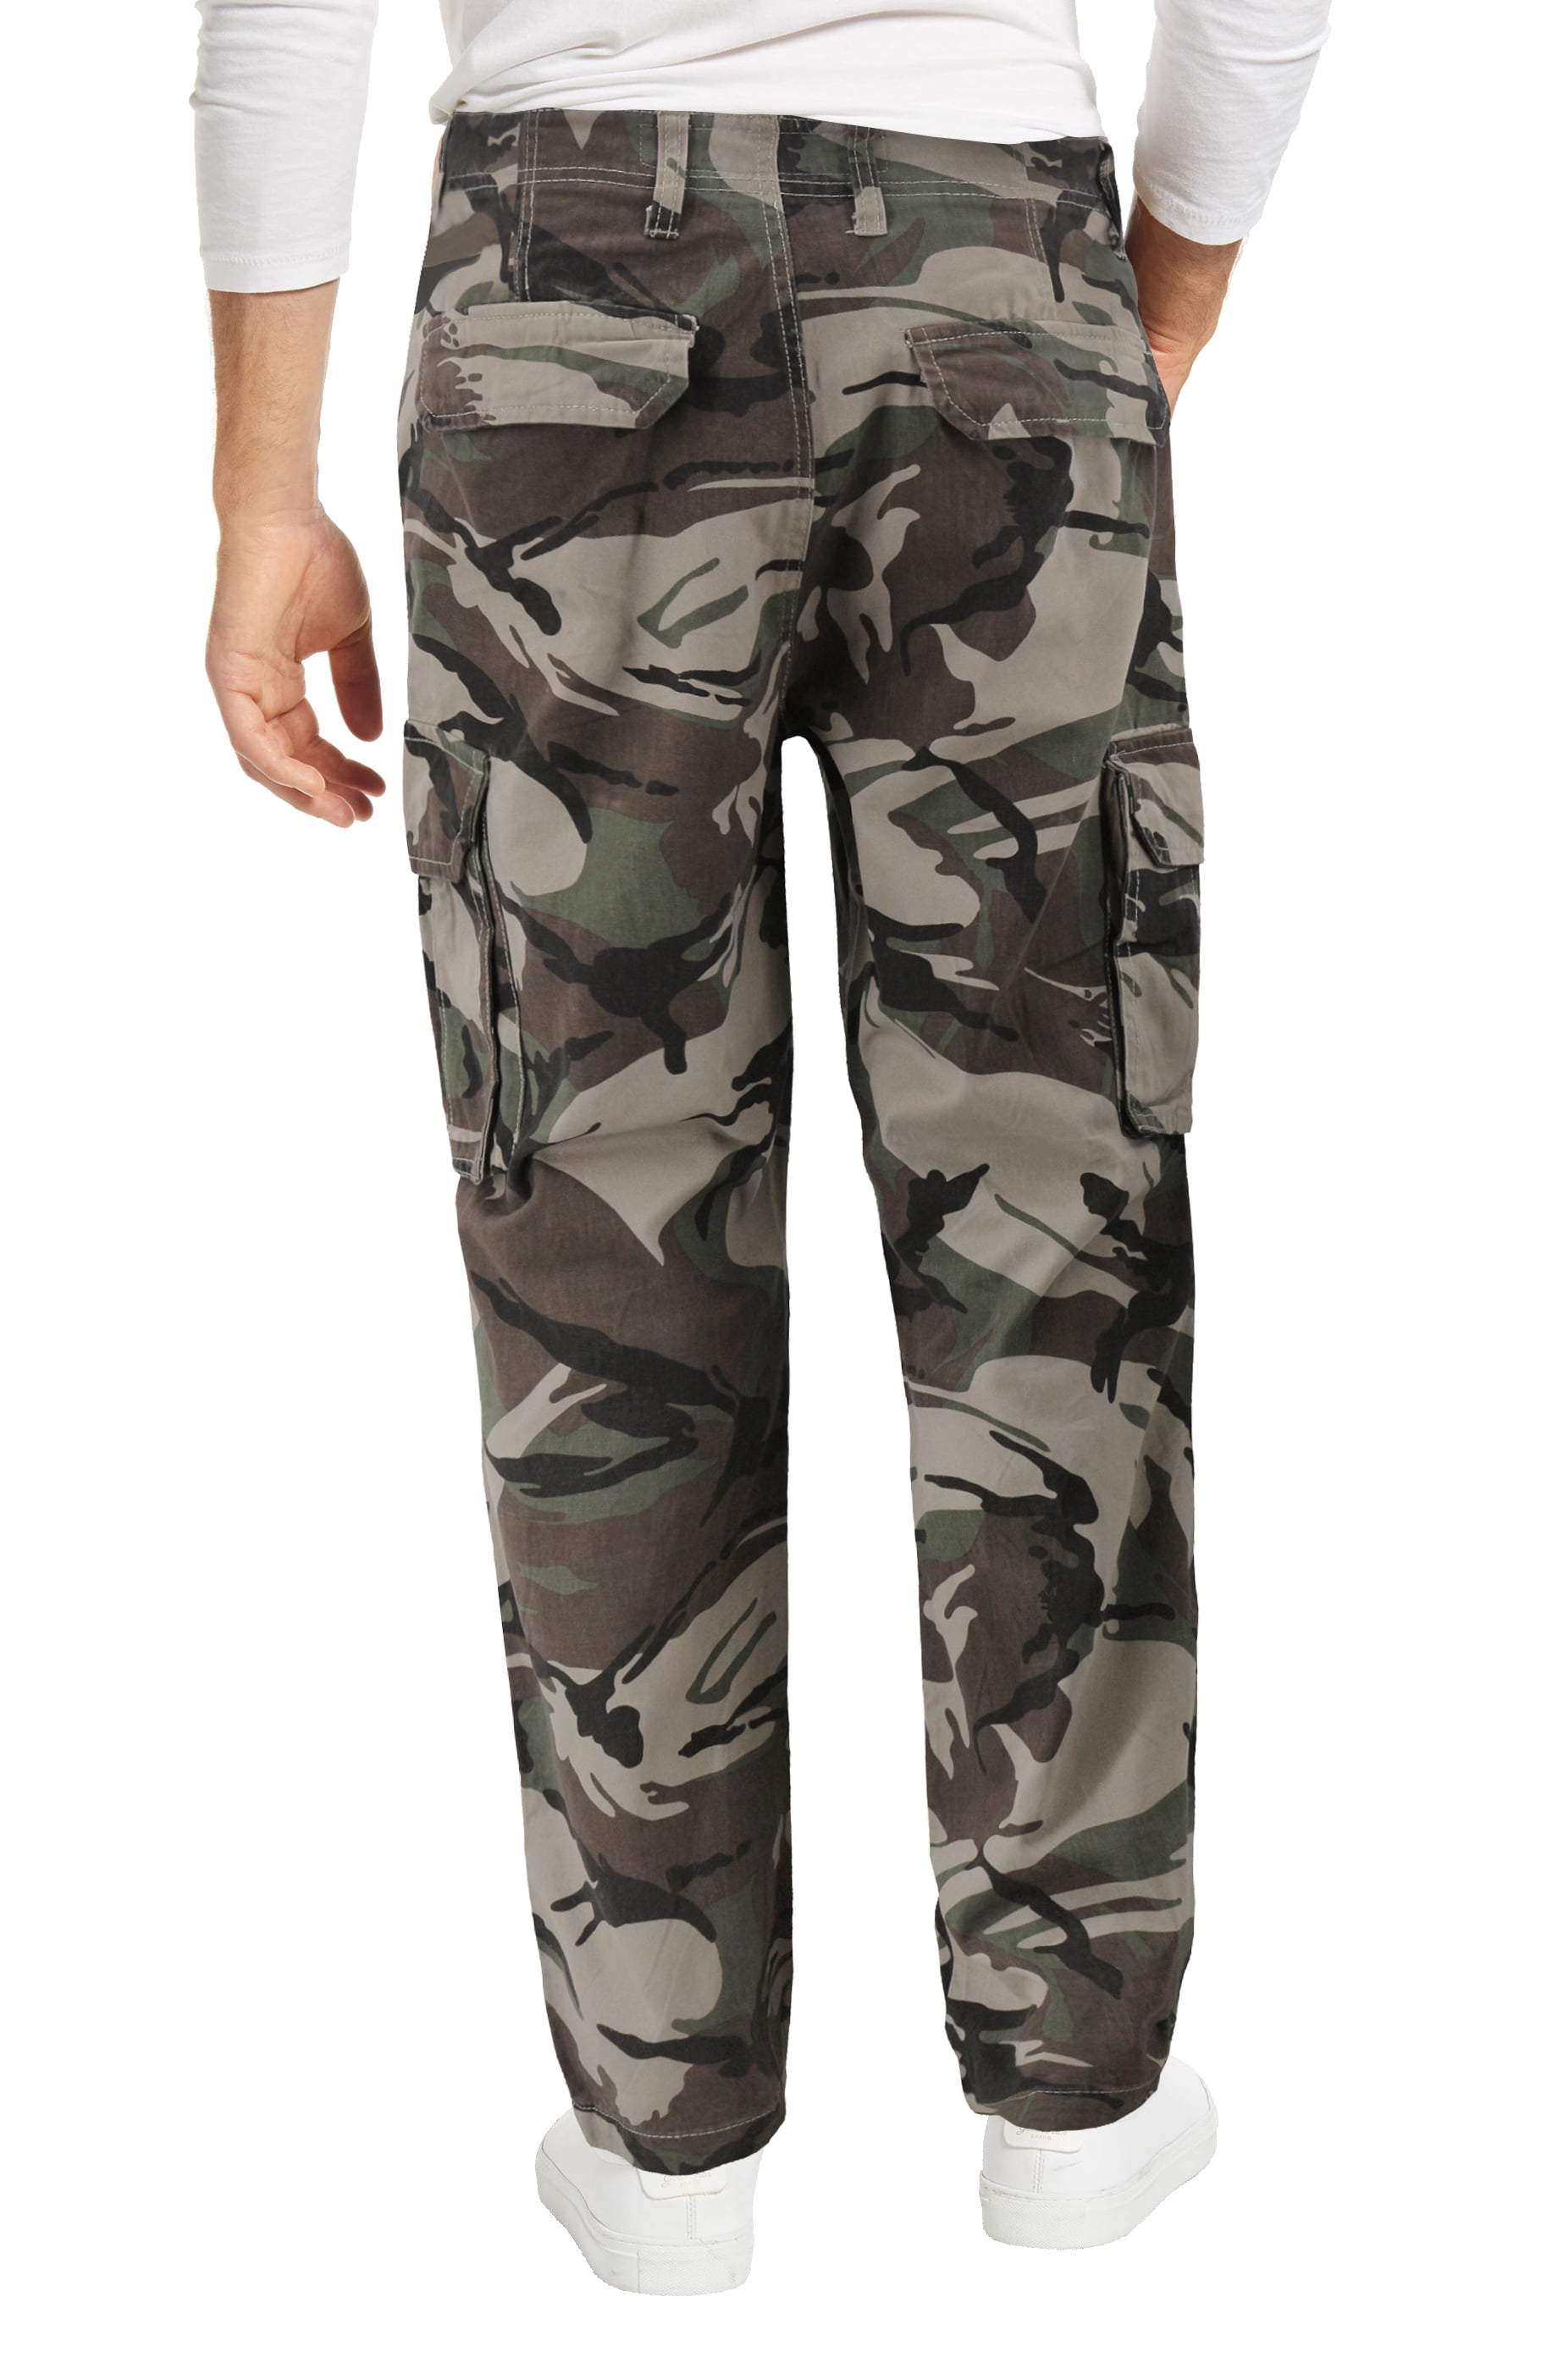 Men's Cotton Tactical Work Trousers Multi Pocket Military Army Cargo Pants  (Forest Camo, 30x30) 